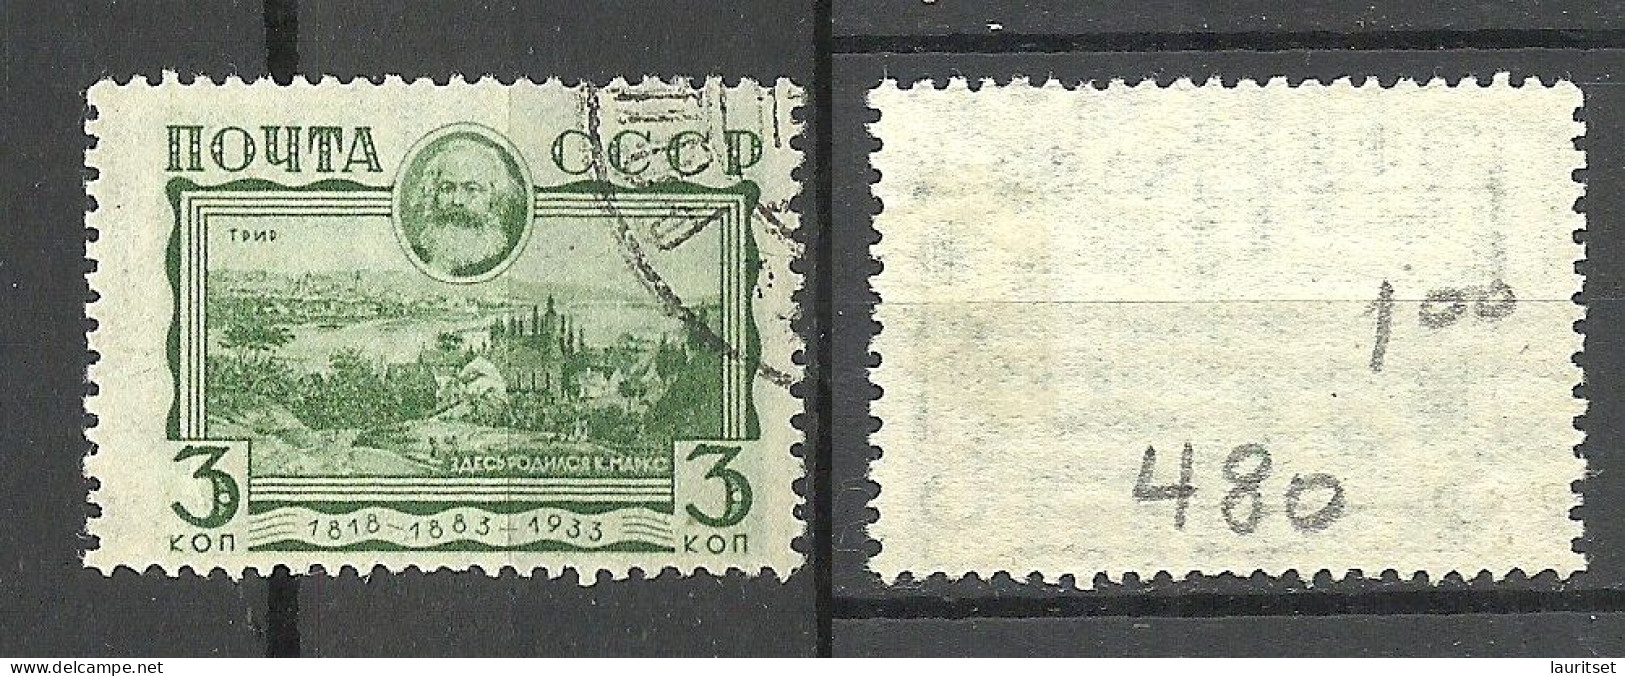 RUSSLAND RUSSIA 1933 Michel 424 Y (wm Horizontal) O - Used Stamps